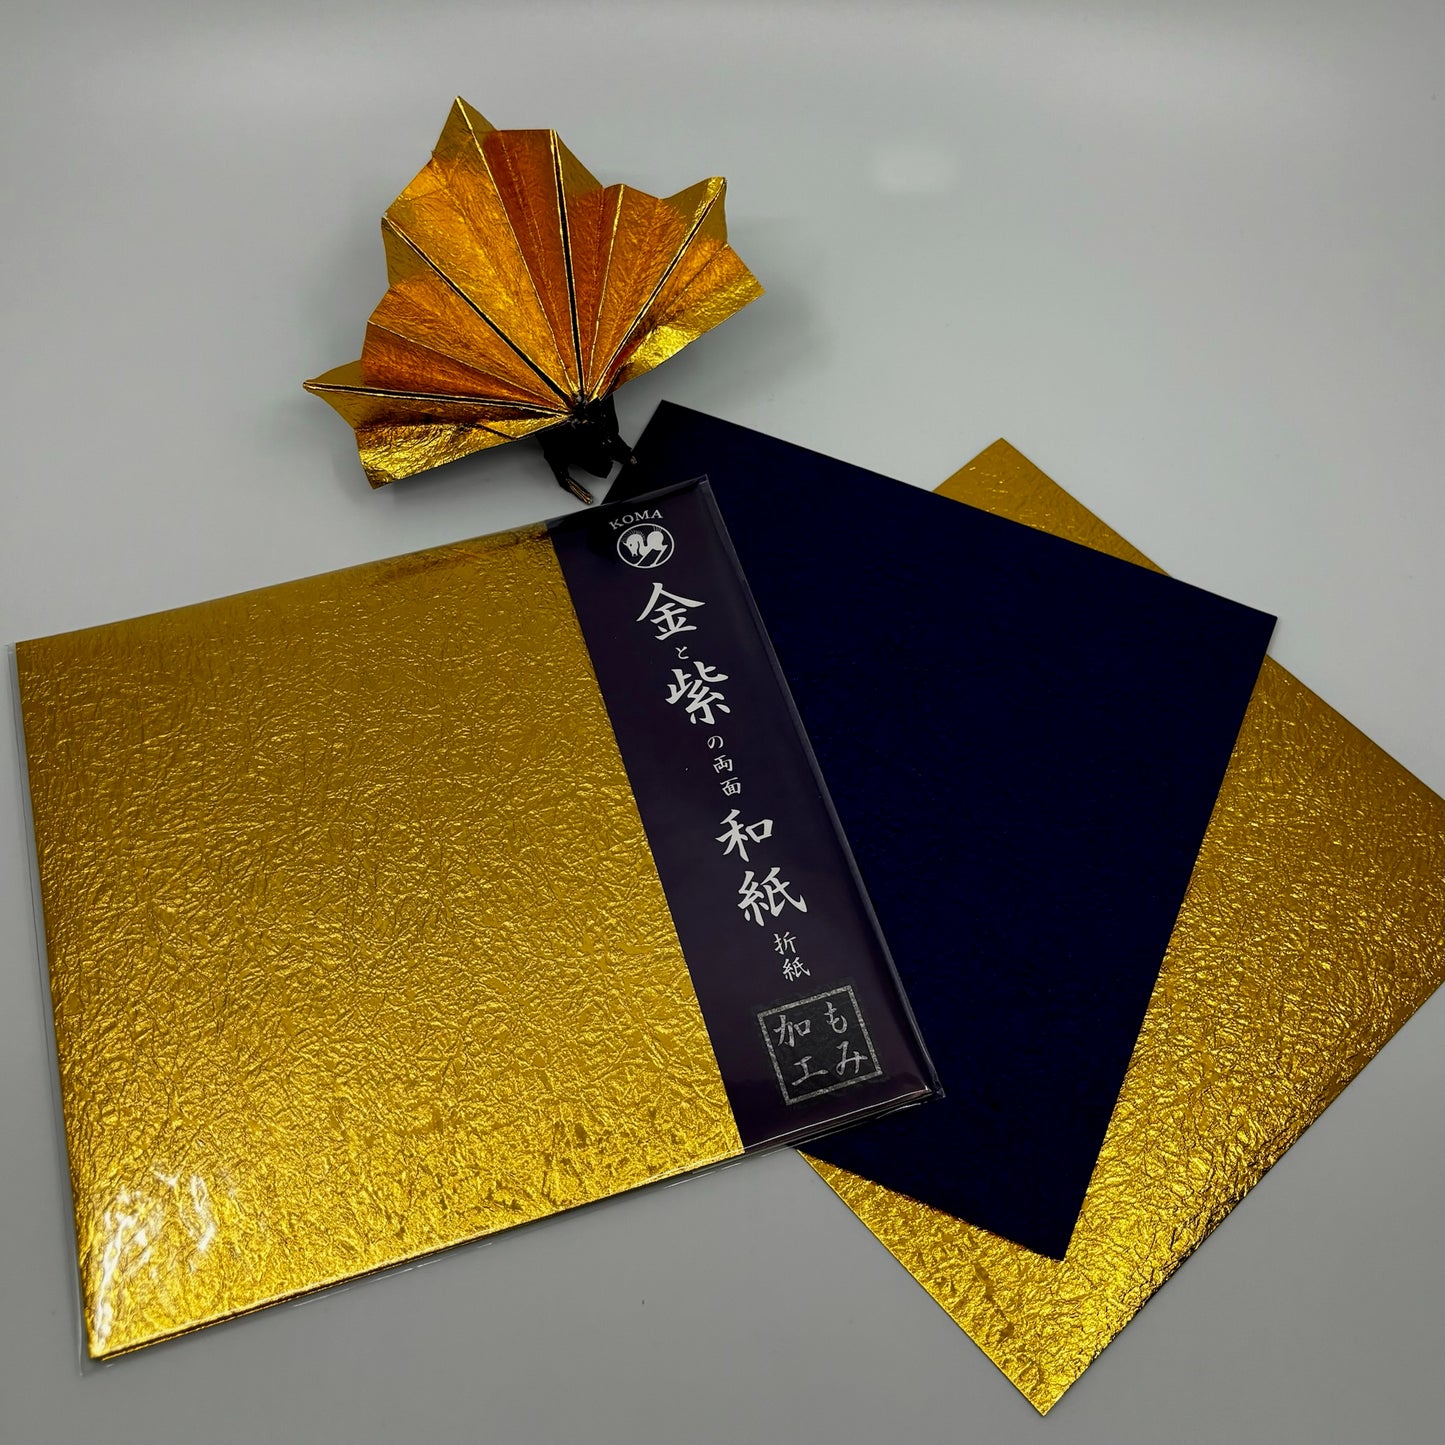 Duo Washi Crumpled single color Gold/Purple 7inch (18cm) 10sheets 金と紫の両面和紙折紙　もみ加工